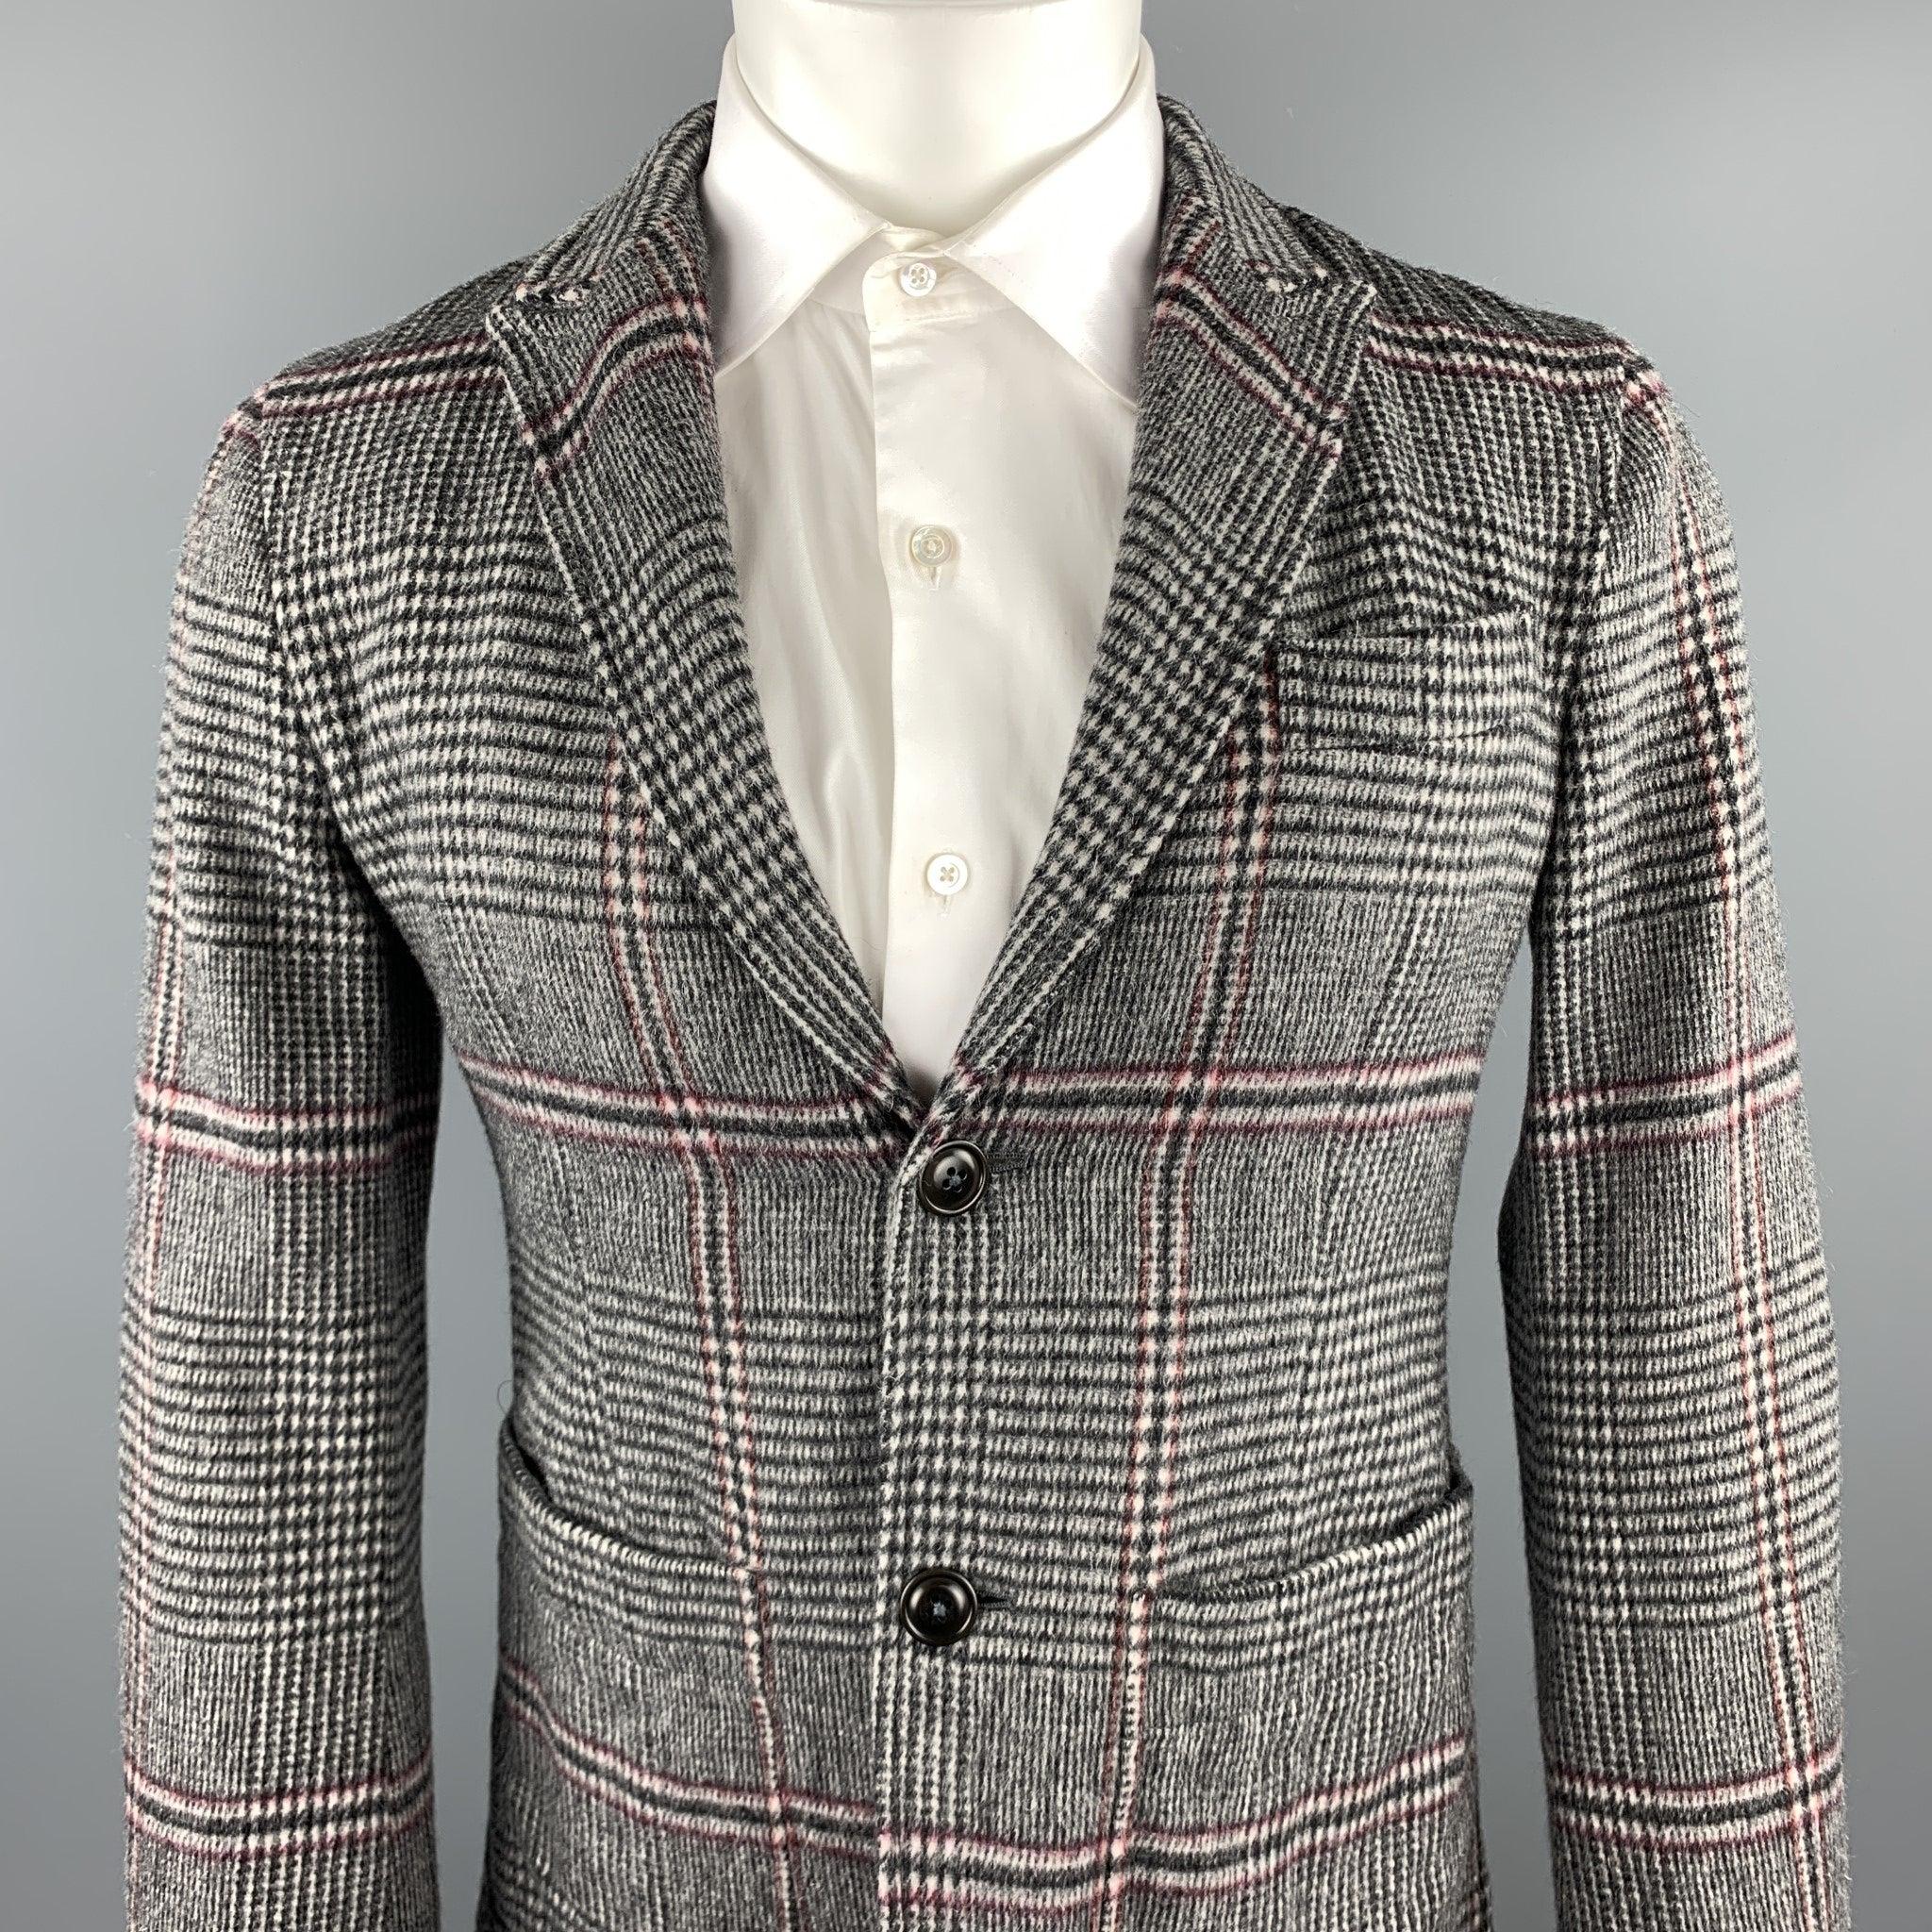 TS (S) sport coat comes in a gray plaid wool featuring a peak lapel, patch pockets, and a two button closure. Made in Japan.Very Good
Pre-Owned Condition. 

Marked:   JP 2 

Measurements: 
 
Shoulder: 16 inches 
Chest: 38 inches 
Sleeve: 25 inches